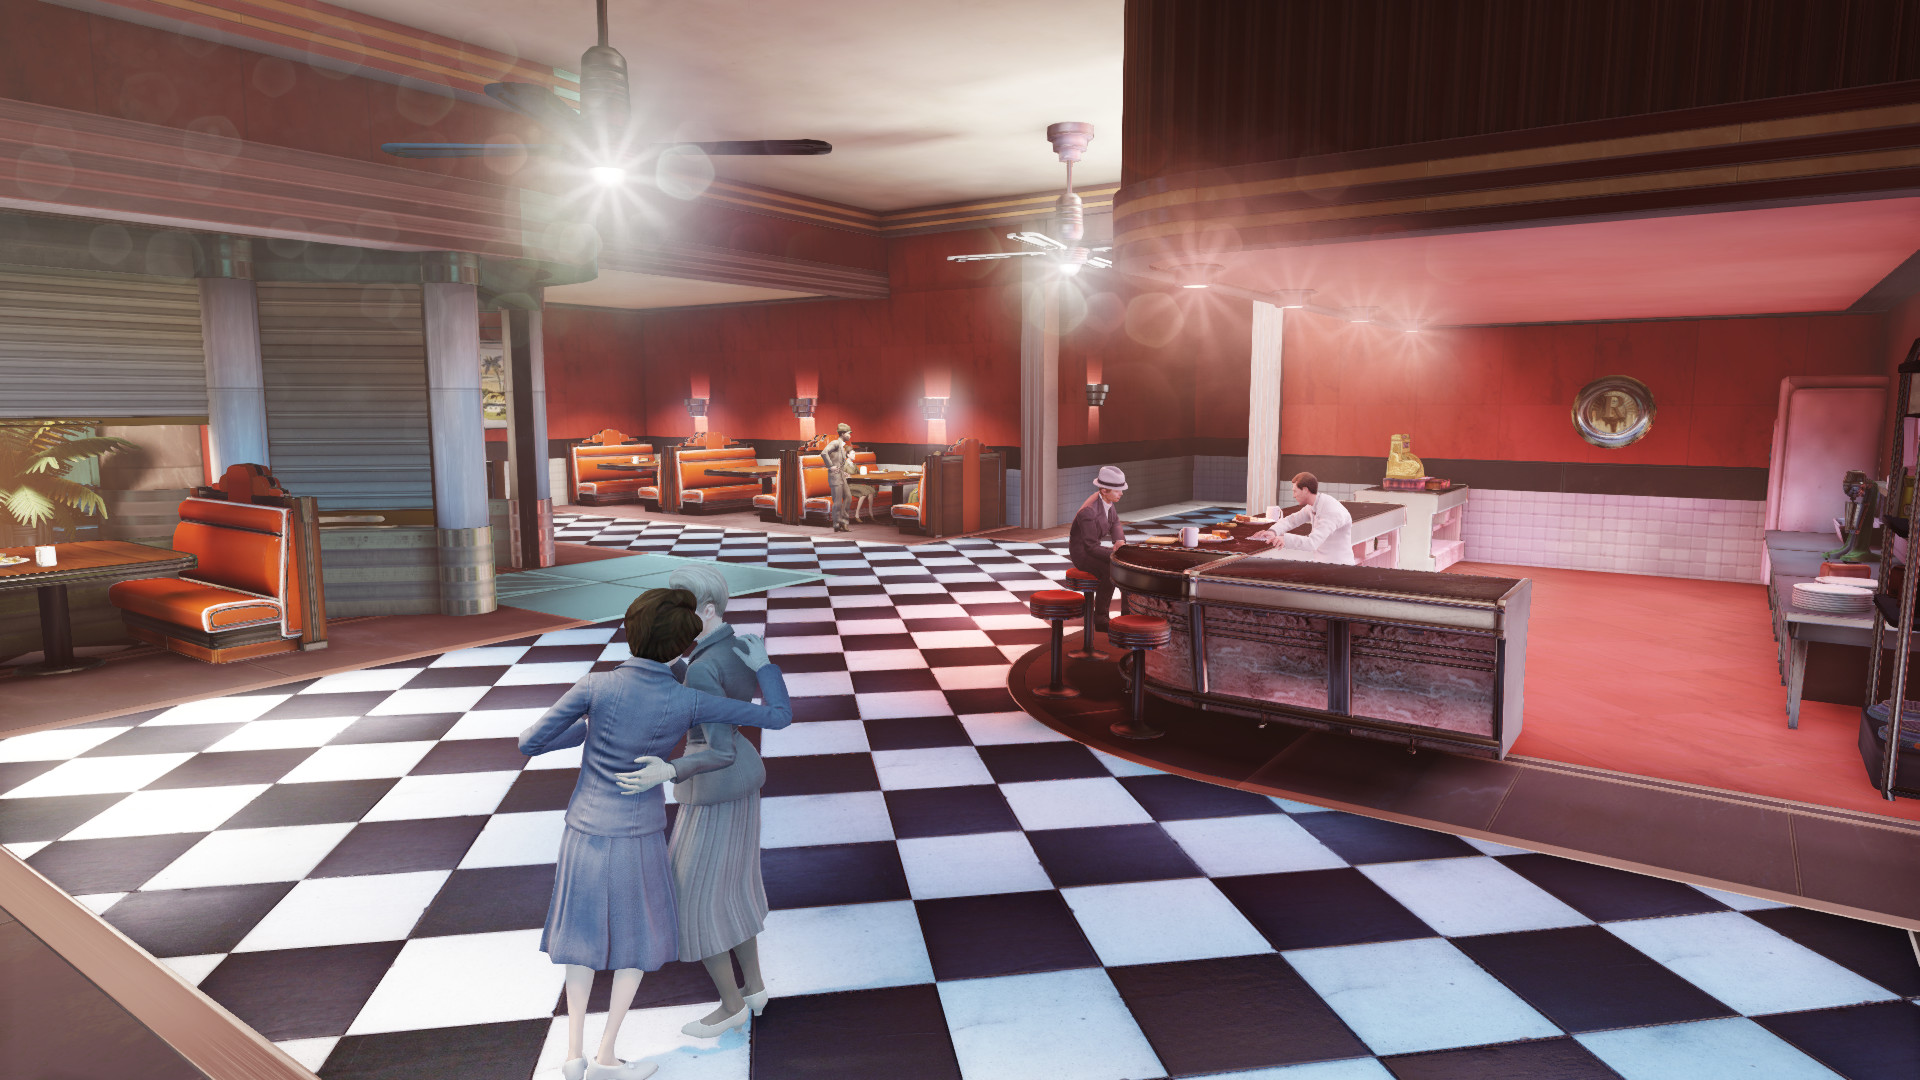 1920x1080 ... BioShock Infinite: Burial at Sea or Dave's Diner in Middleboro,  Massachusetts. Thanks in advance!